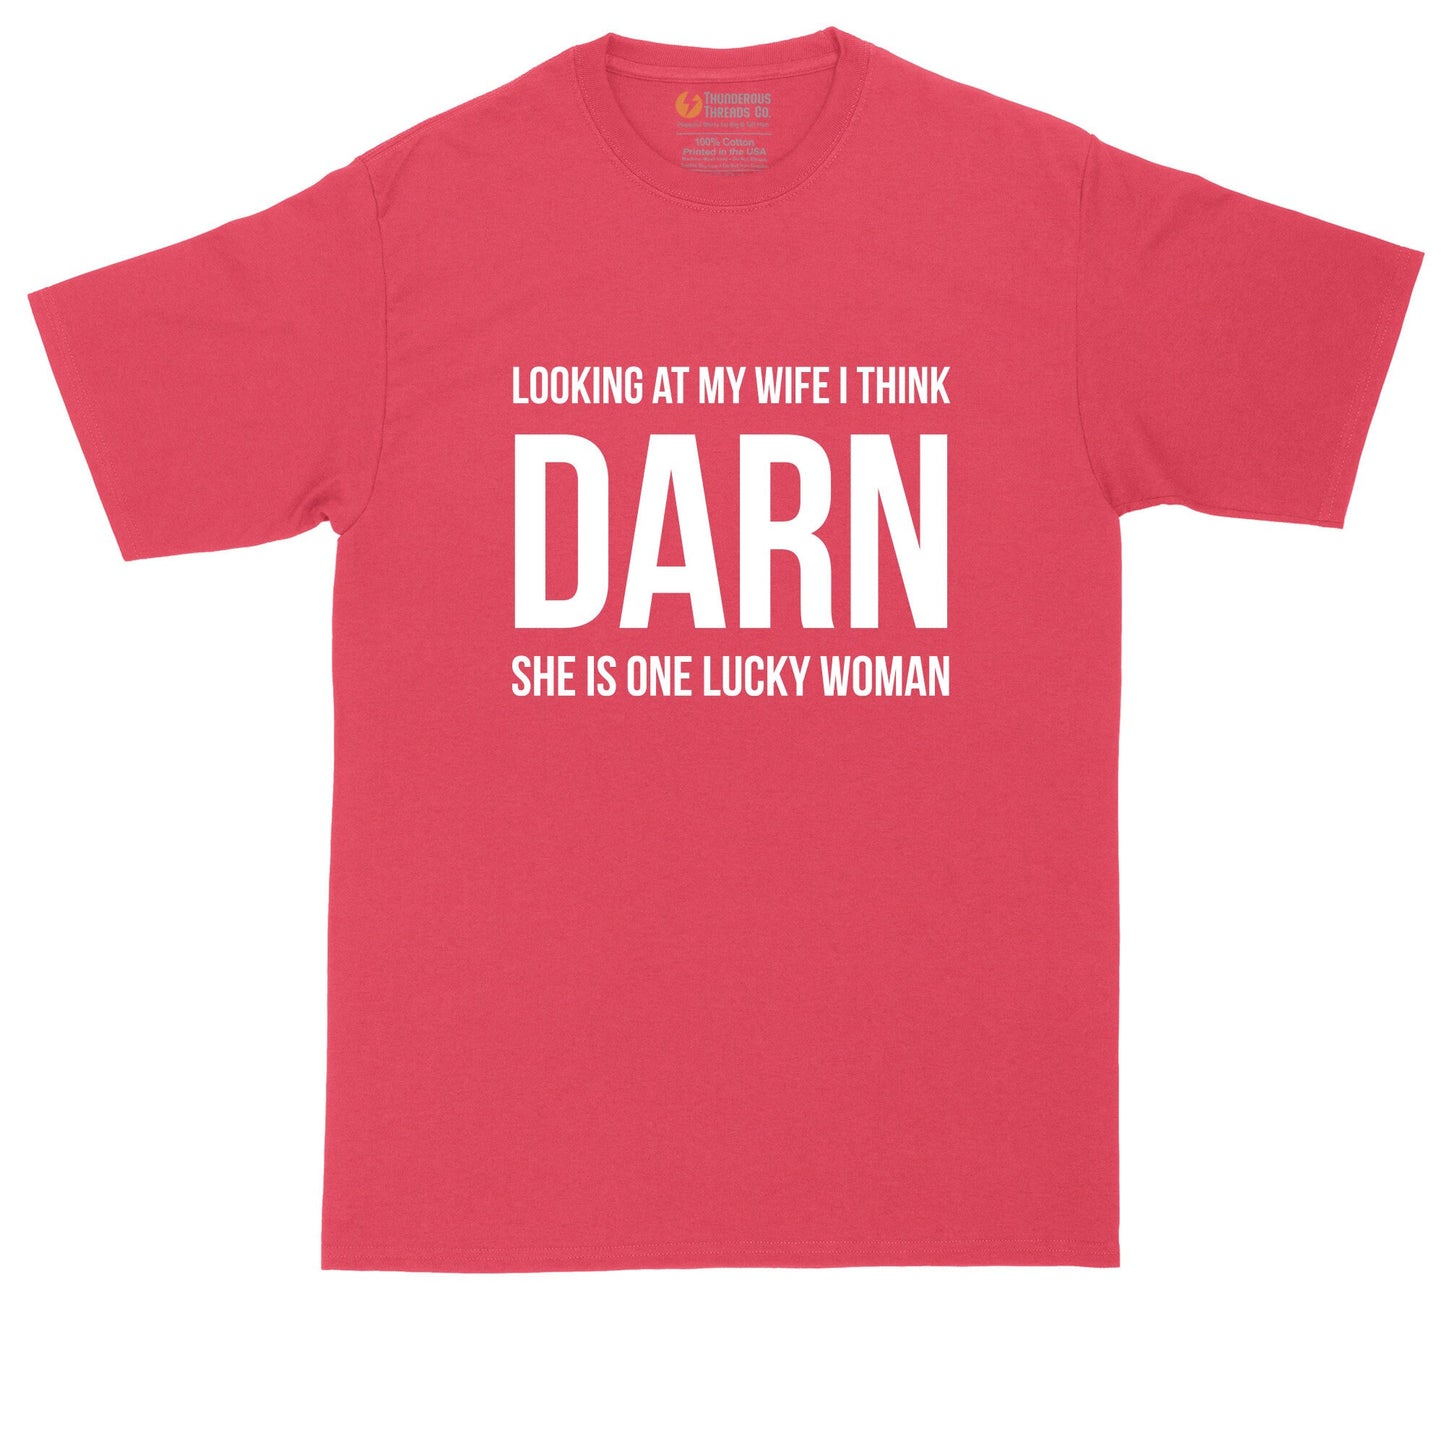 Looking at My Wife I Think Damn She Is One Lucky Woman | Mens Big & Tall T-Shirt | Funny Shirt | Husband | Wedding Gift | Wedding Present